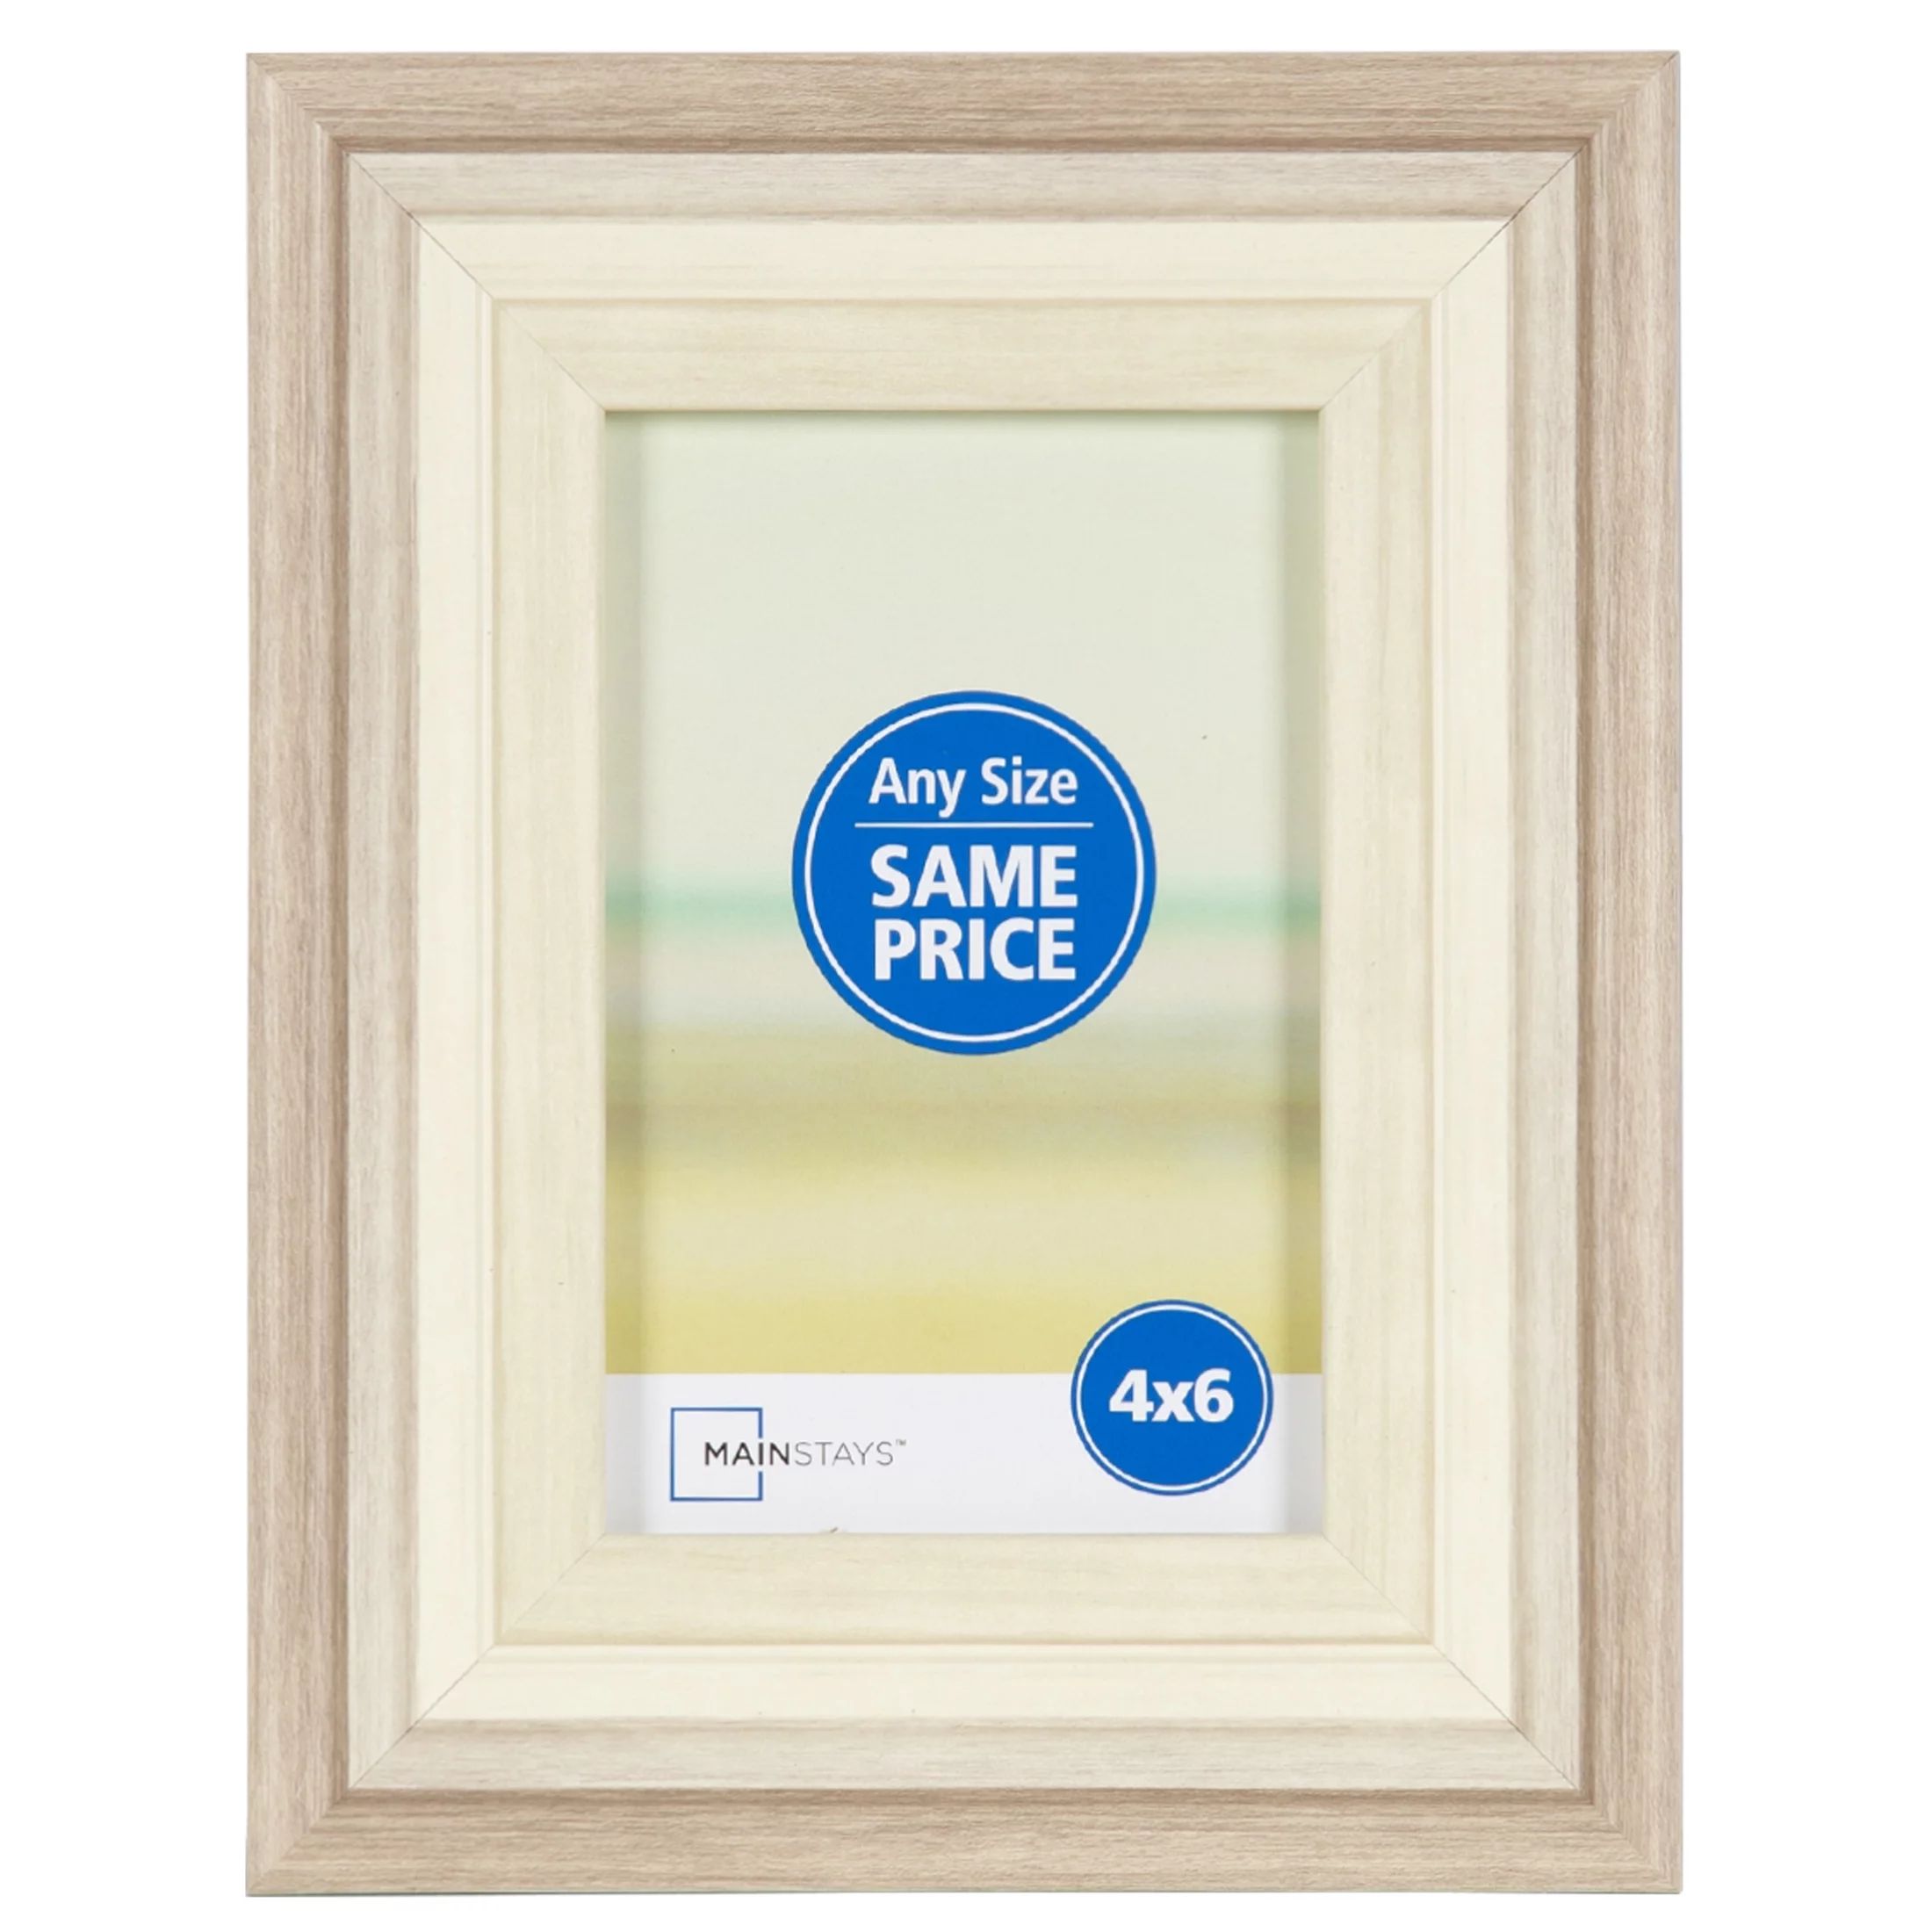 Mainstays Two Tone 4x6 Tabletop Picture Frame, Beige | Walmart (US)